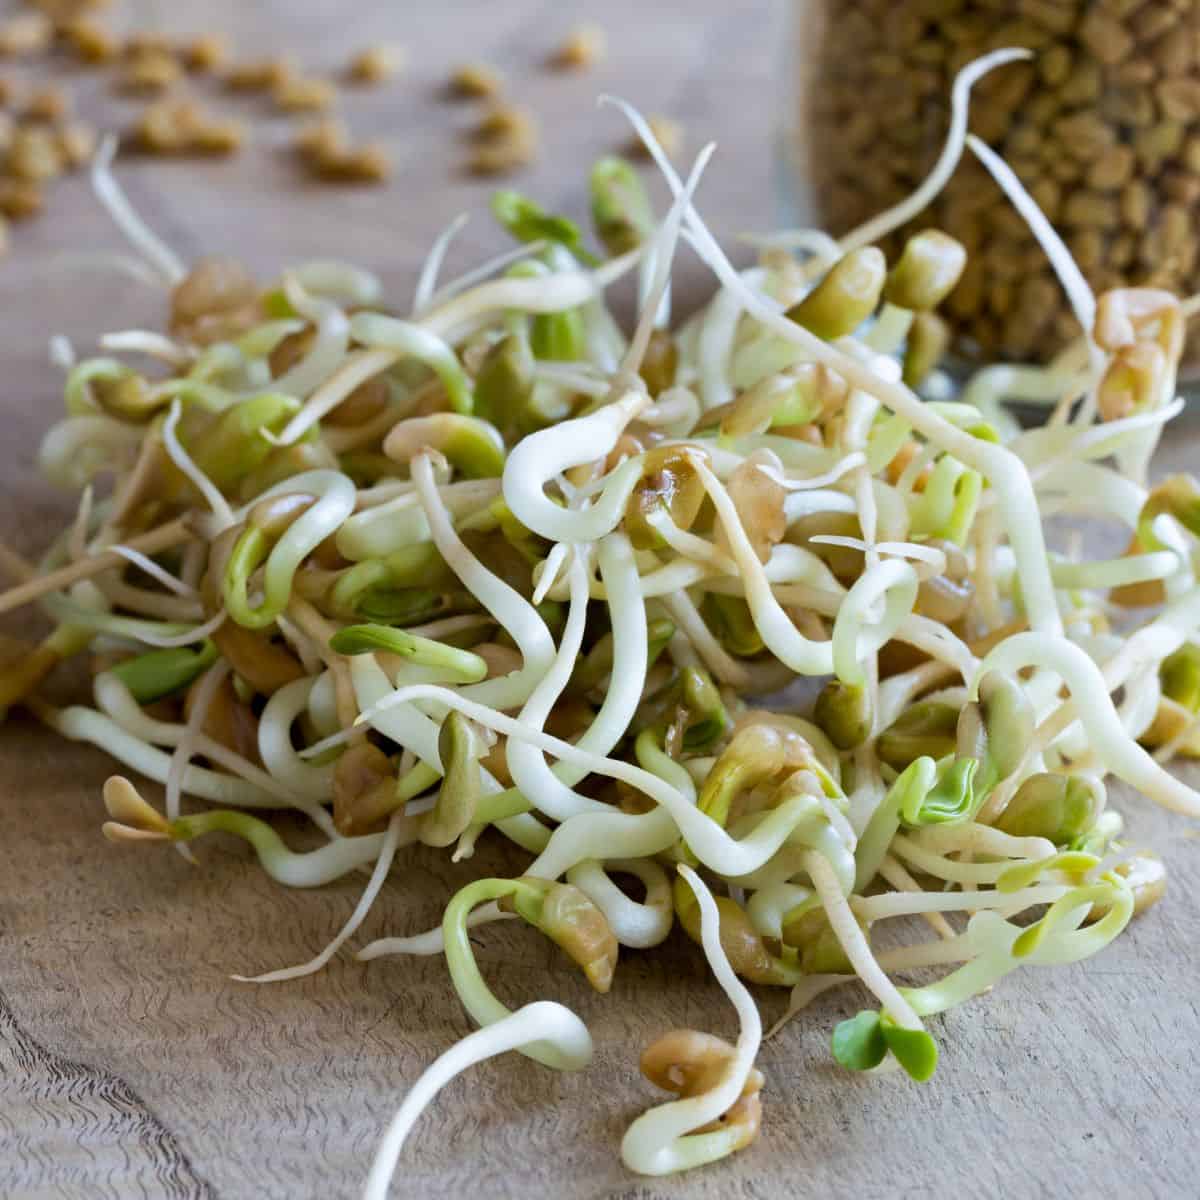 The best sprouts to grow, a pile of sprouted fava beans on a wooden table.